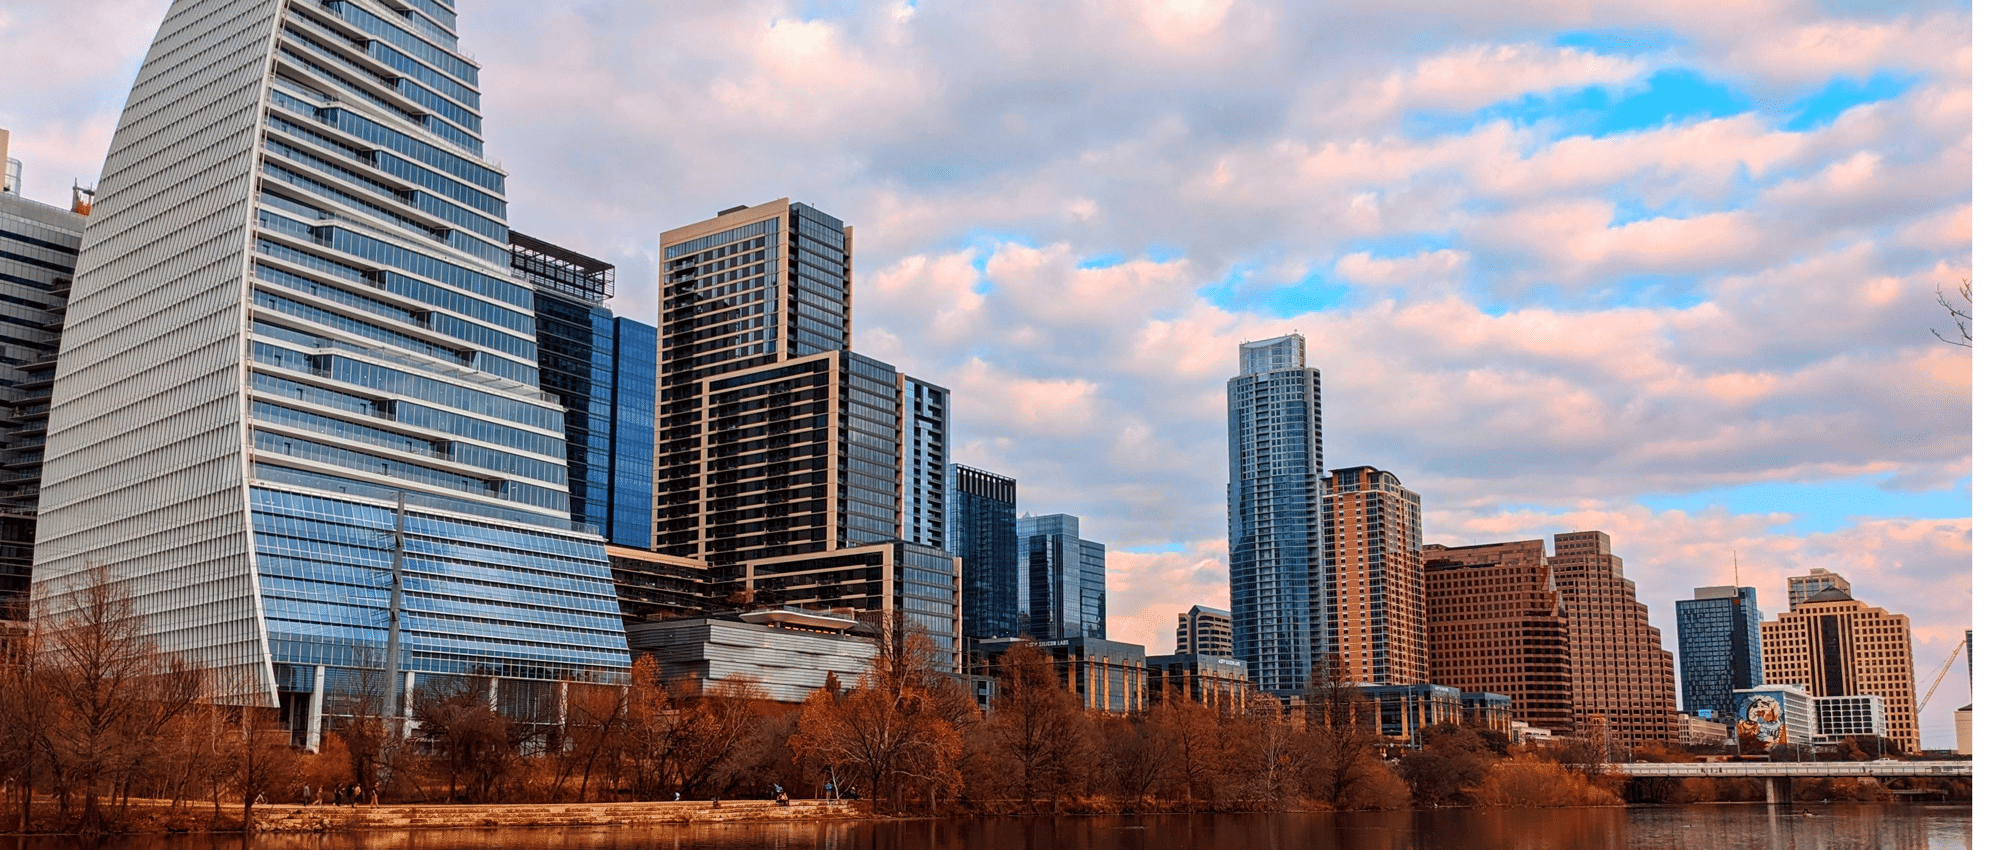 Austin Skyline | 5 Mistakes to Avoid When Relocating Your Company to Austin